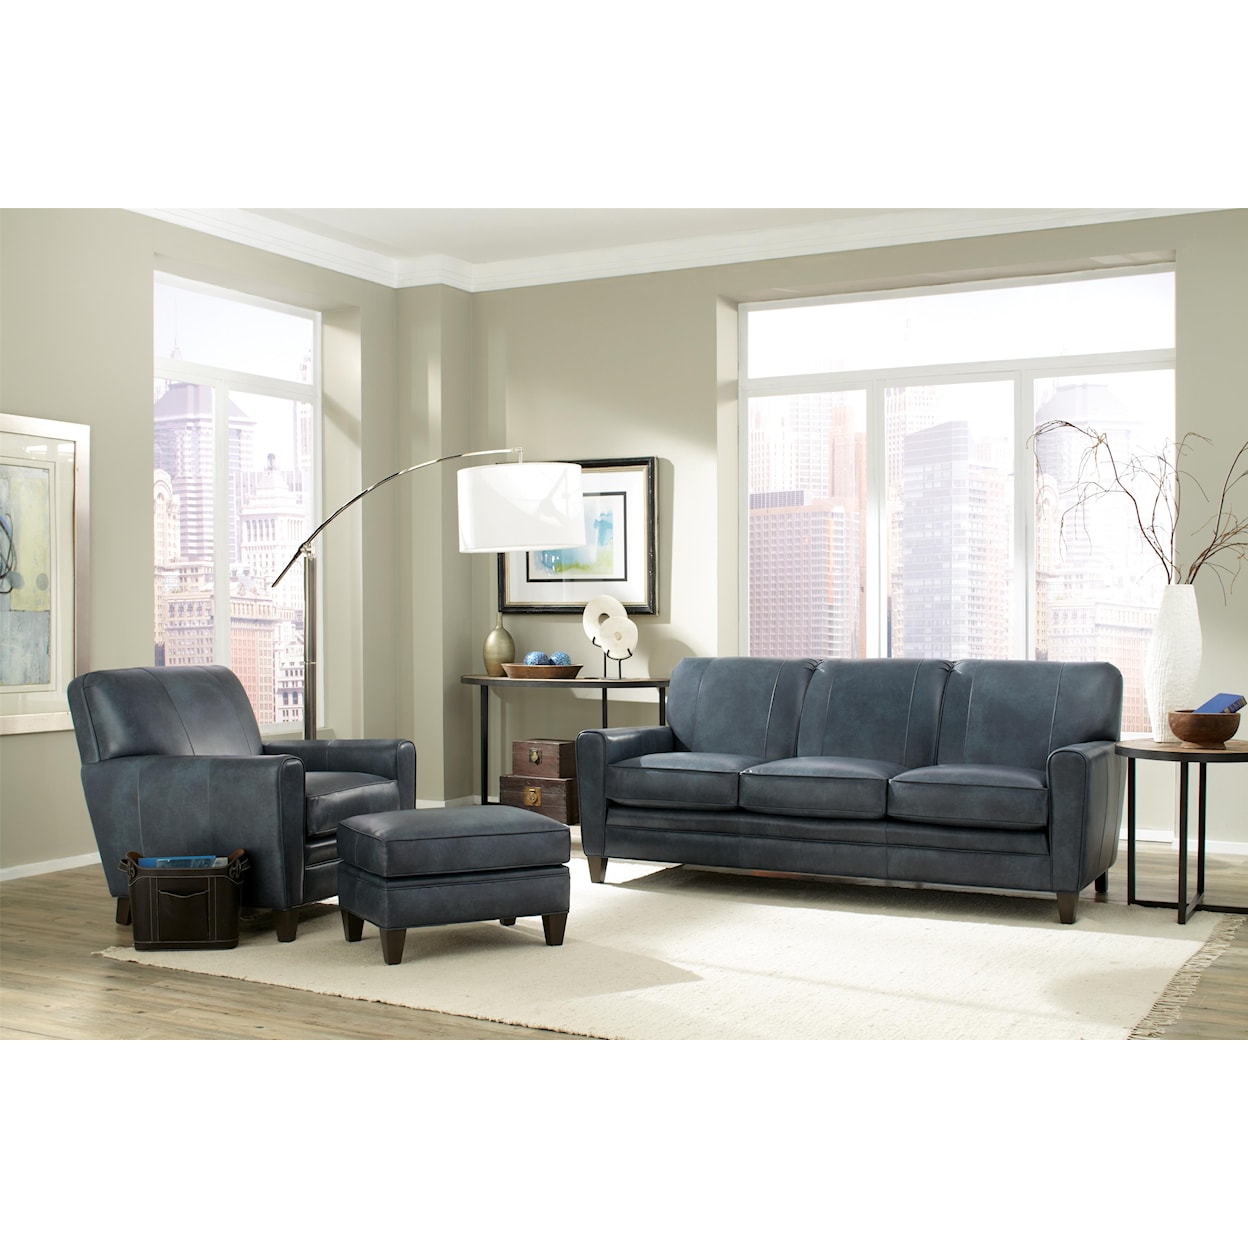 Smith Brothers 225 Stationary Living Room Group